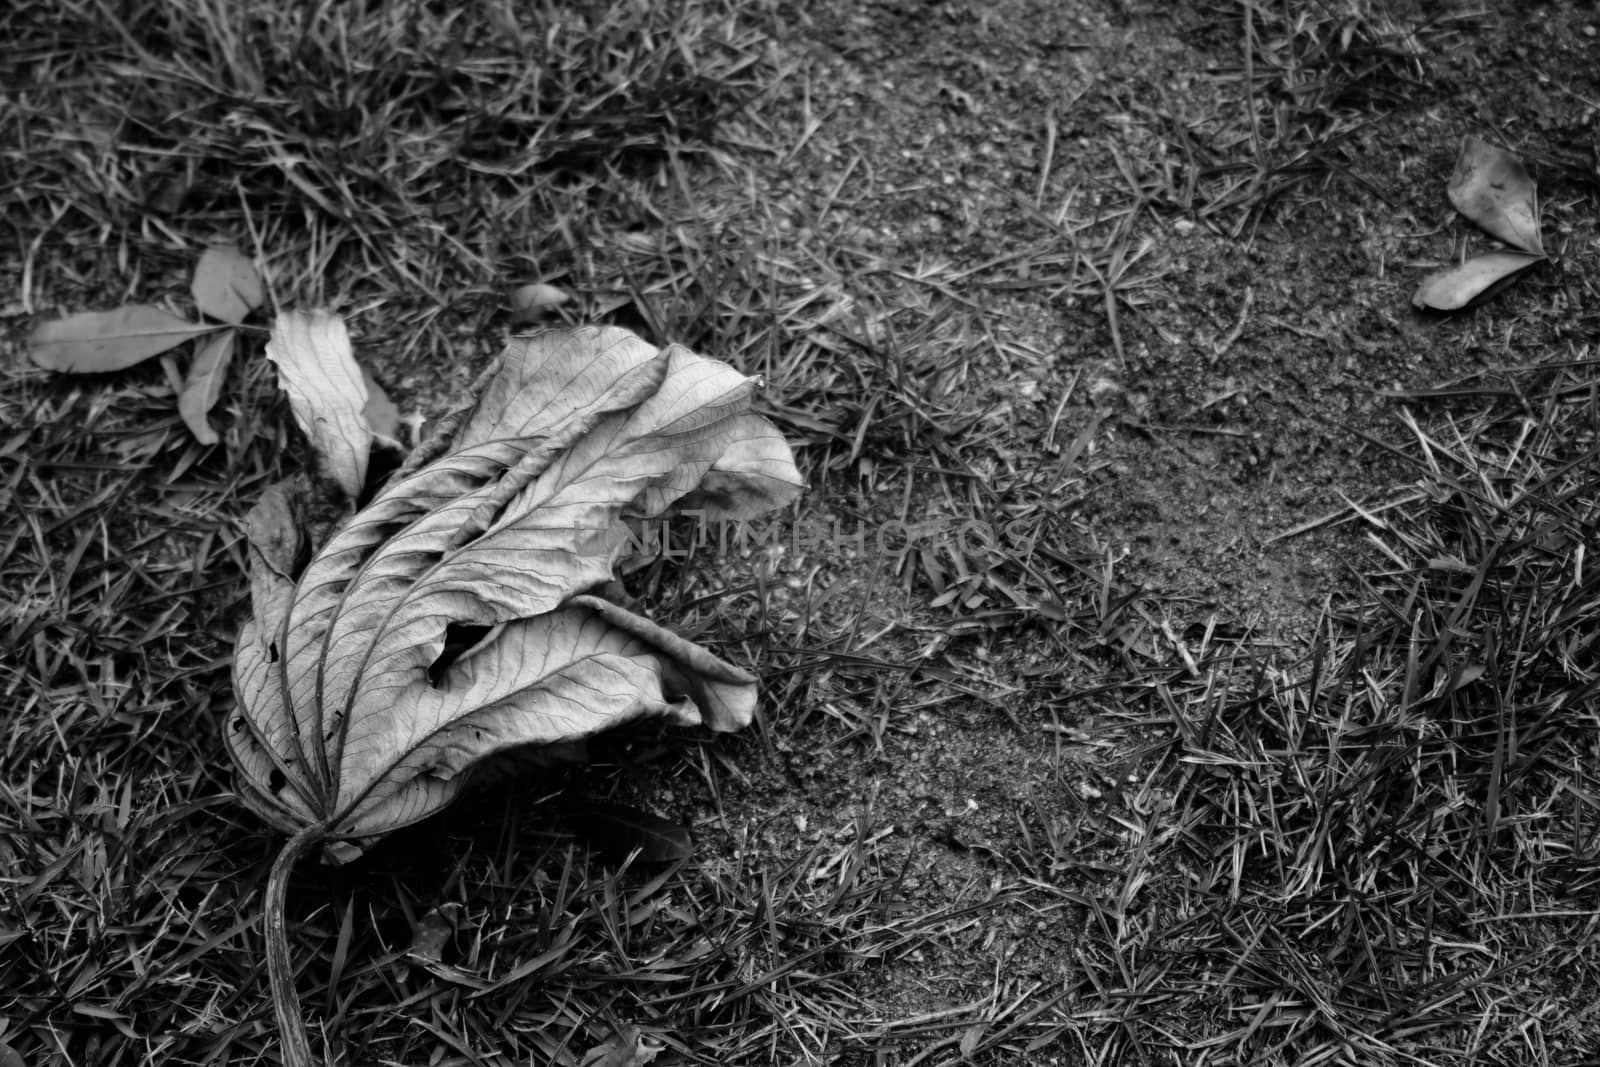 Dead leaf on the grass in black and white